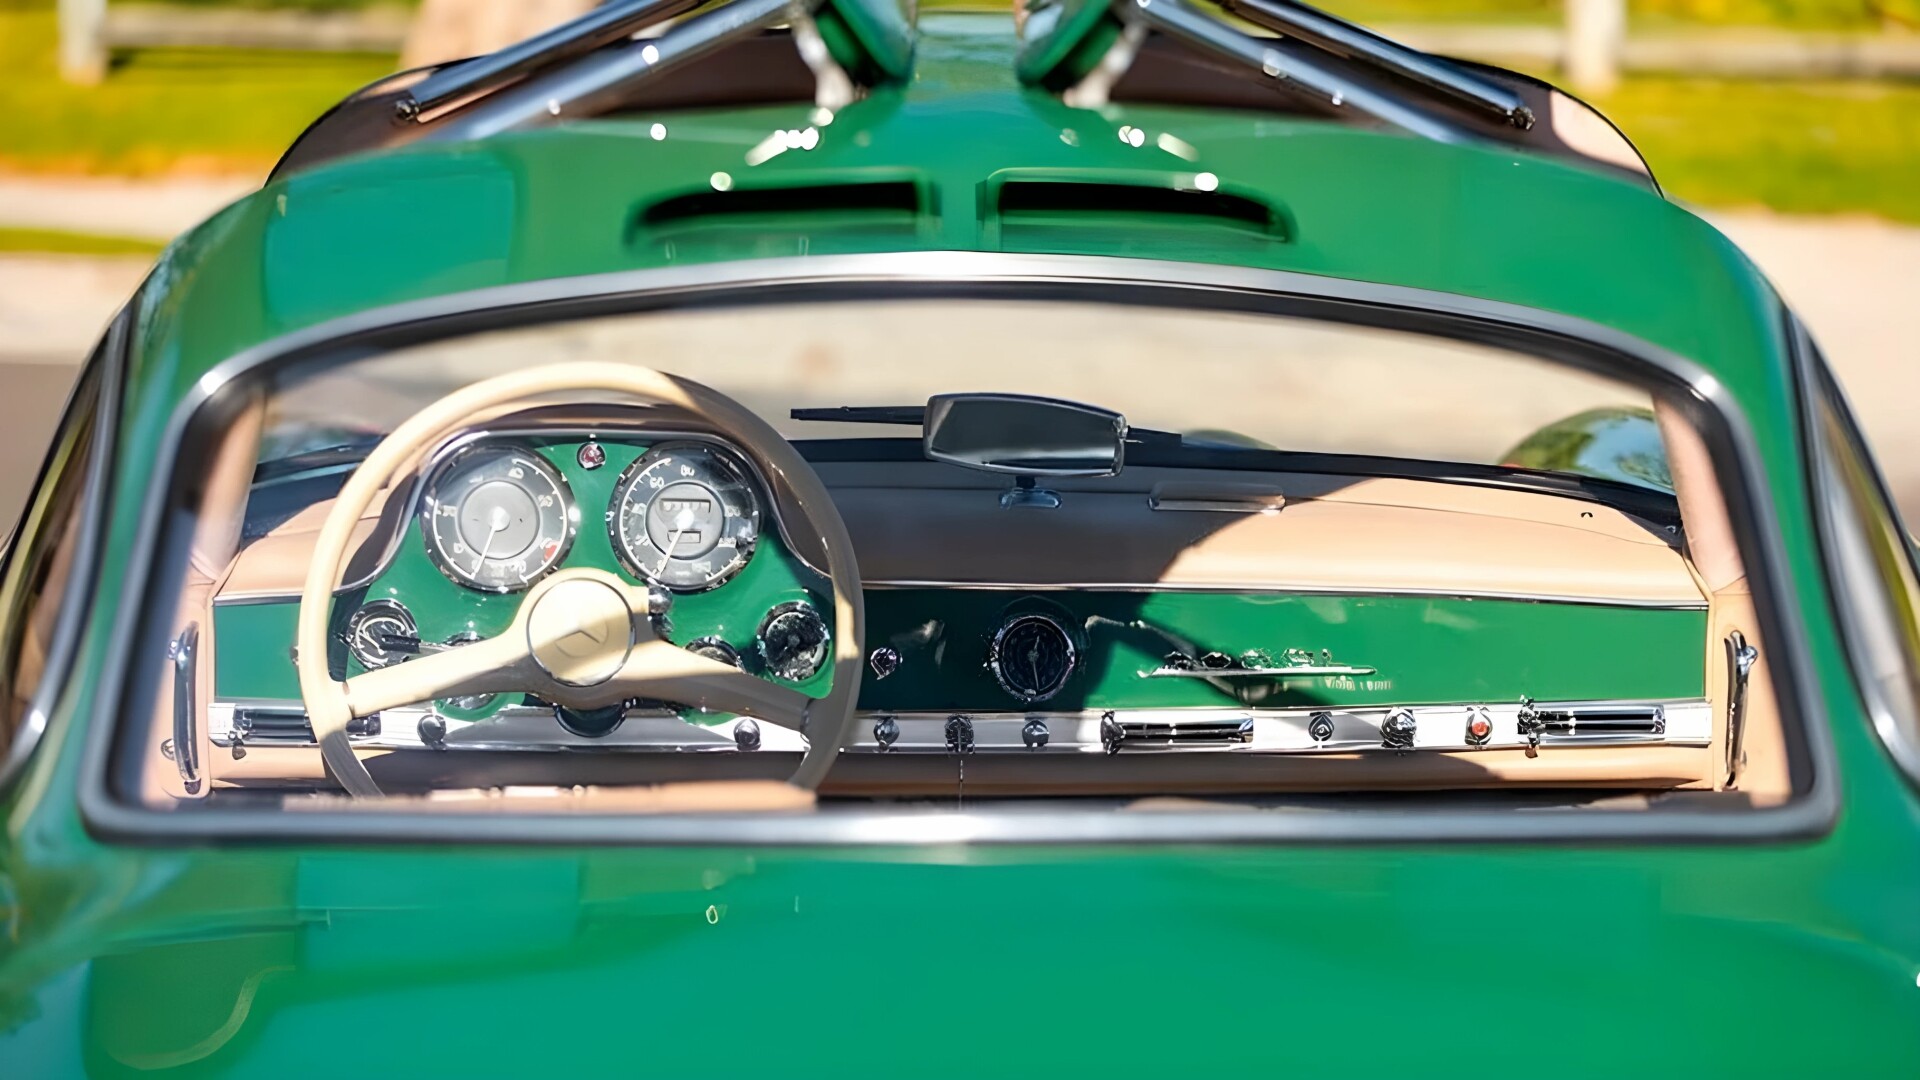 The Green And Gray Leather-Trimmed Interior Of The 1955 Mercedes-Benz 300SL Gullwing Seen From The Rear Windshield